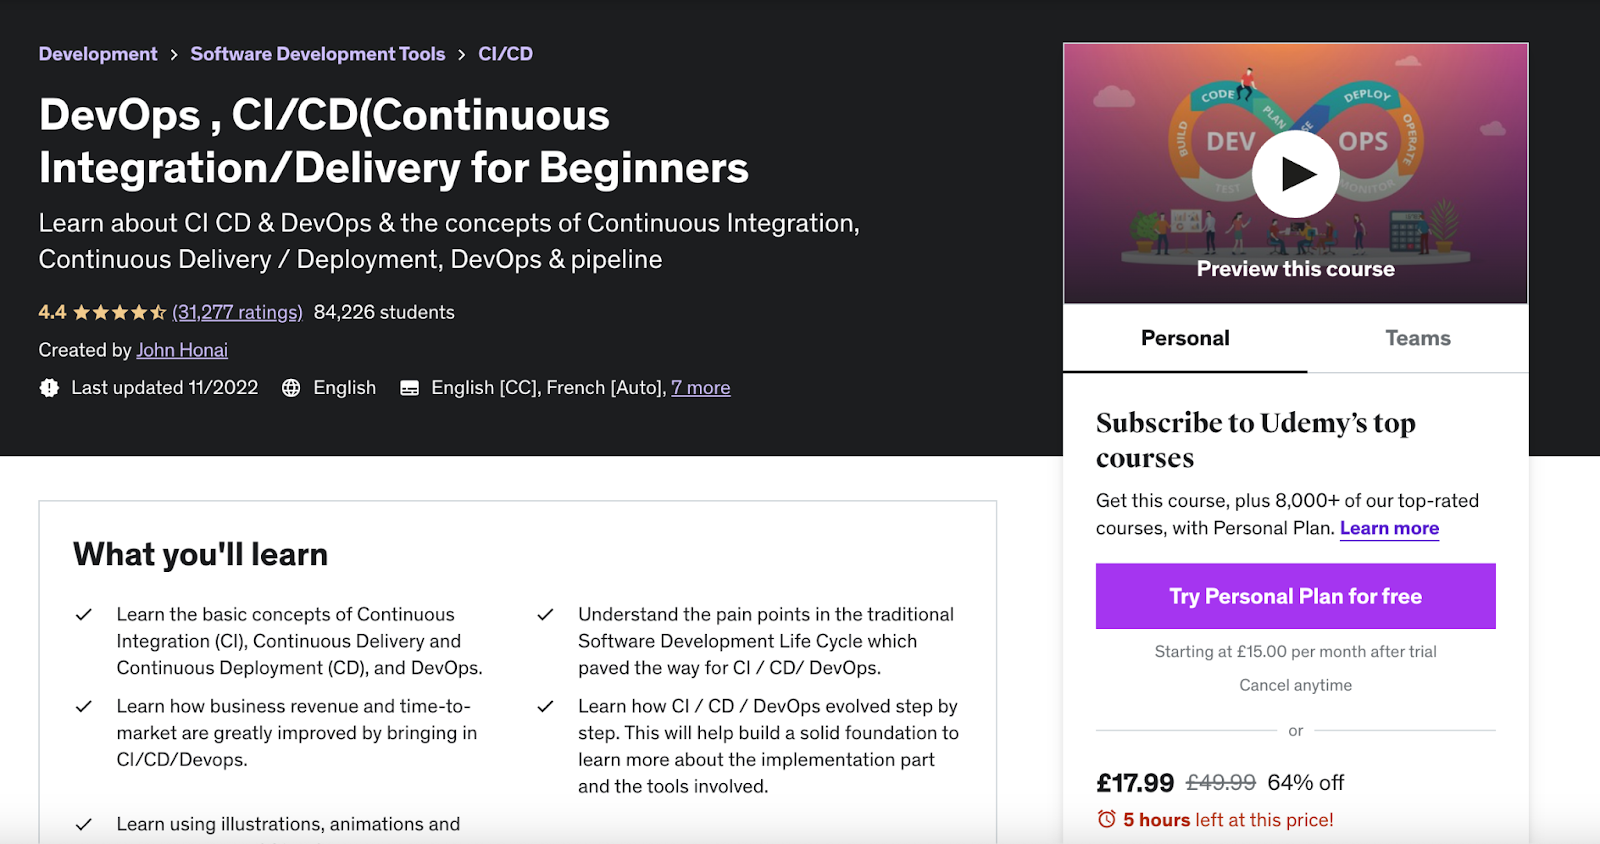 CI/CD (Continuous Integration/Delivery), DevOps for Beginners course